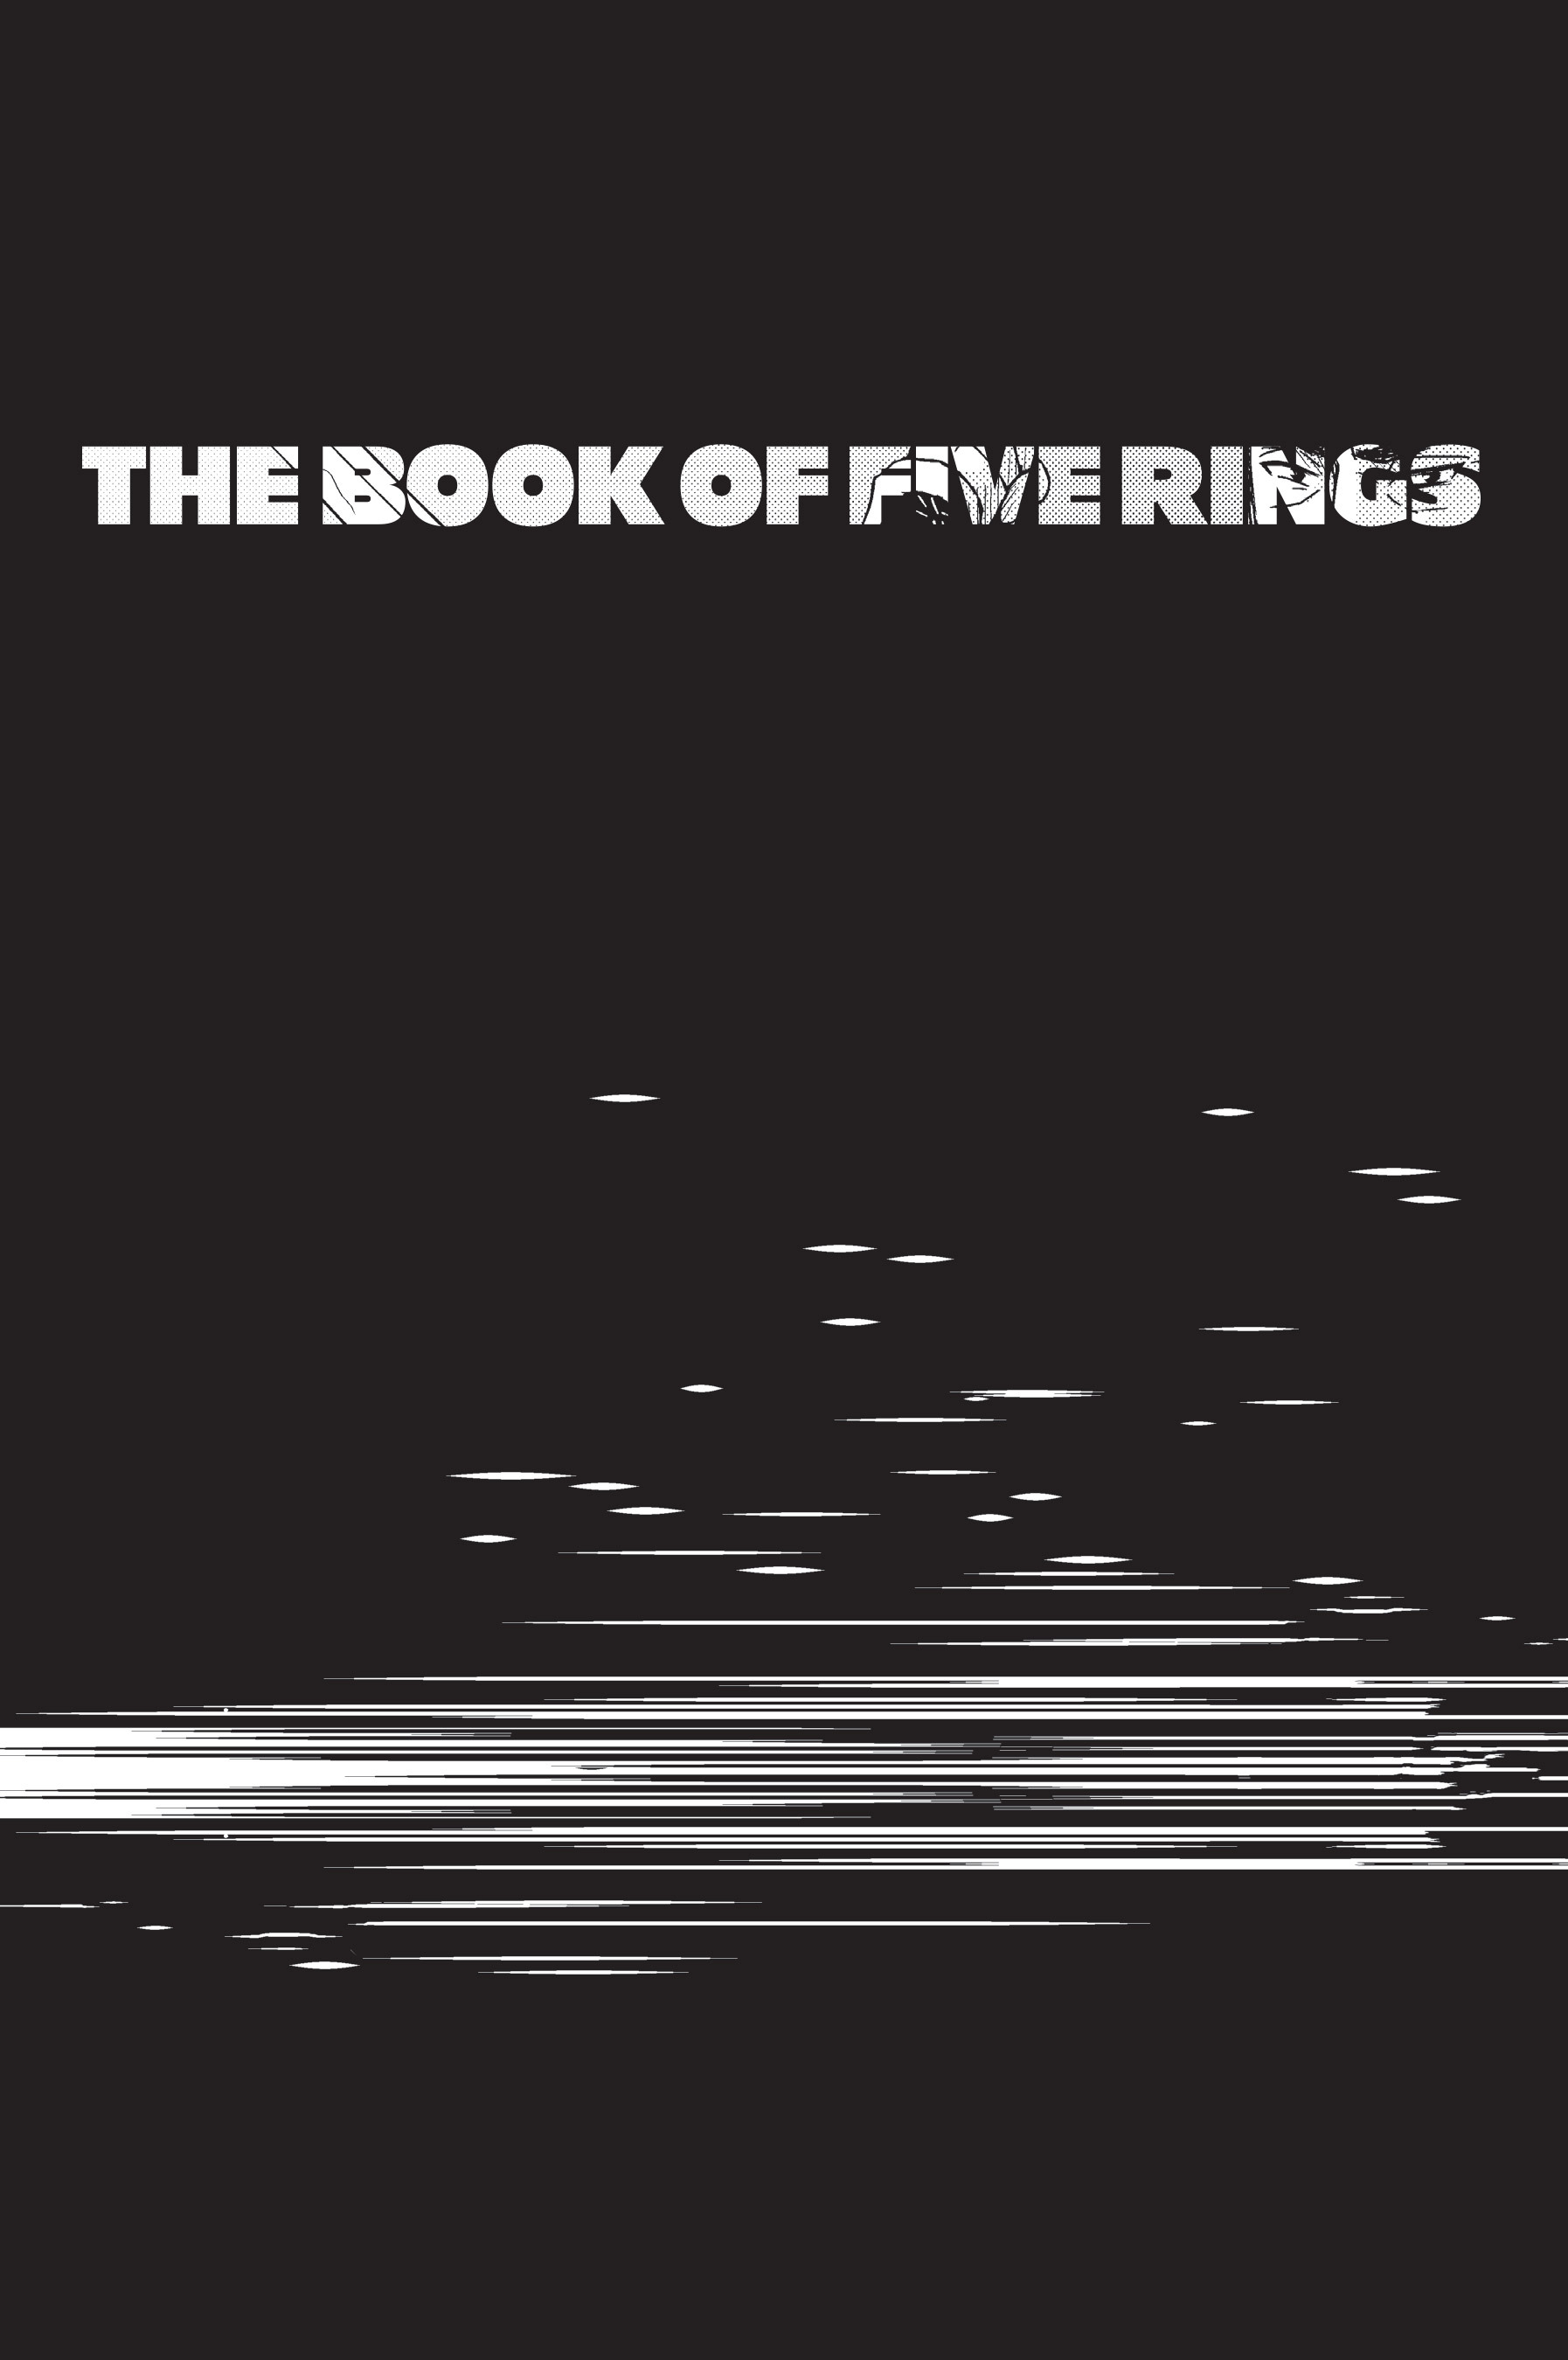 Read online The Book of Five Rings comic -  Issue # TPB - 2